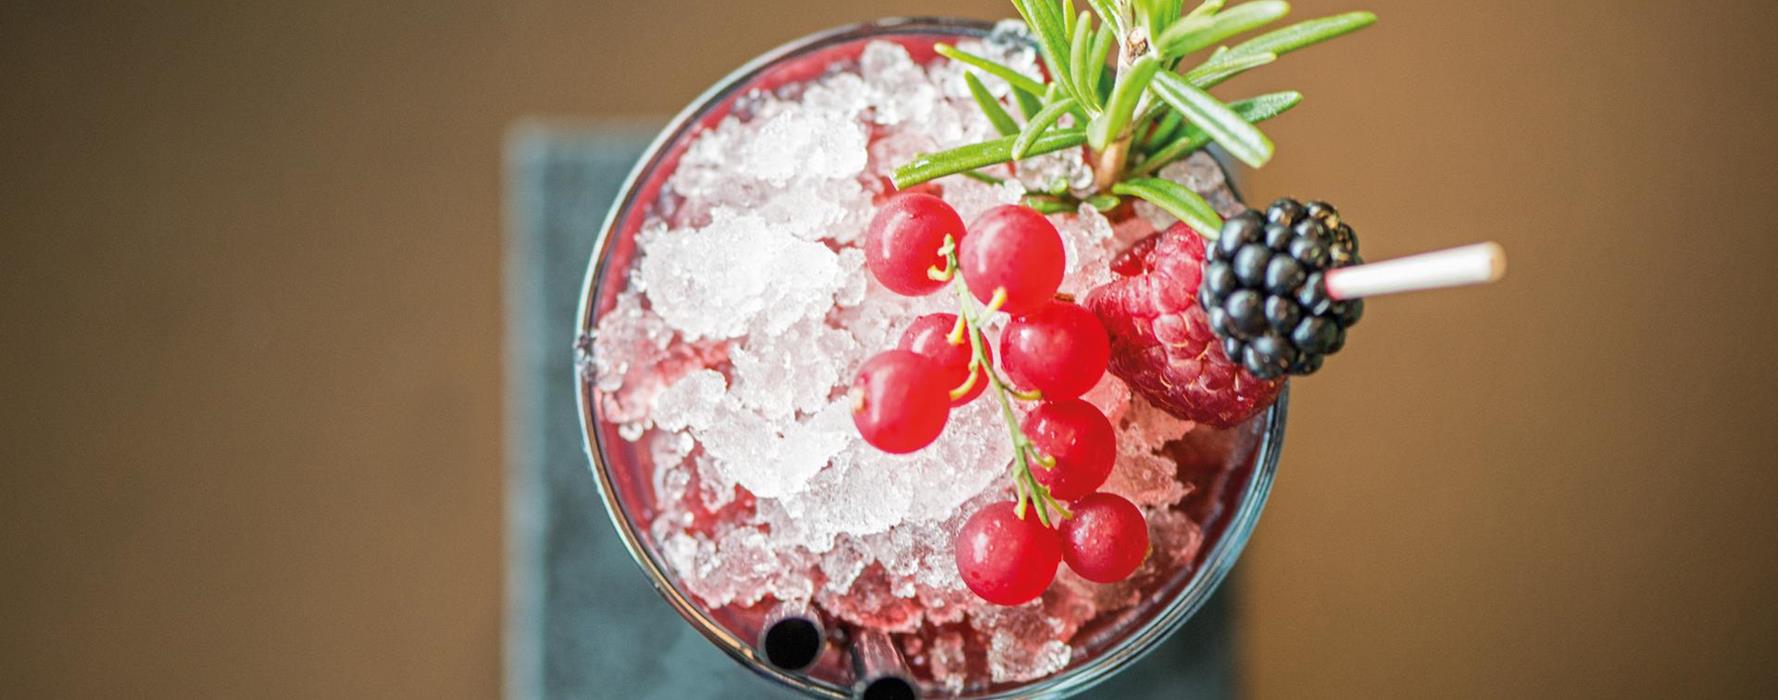 A Cocktail with Berries and Crushed Ice